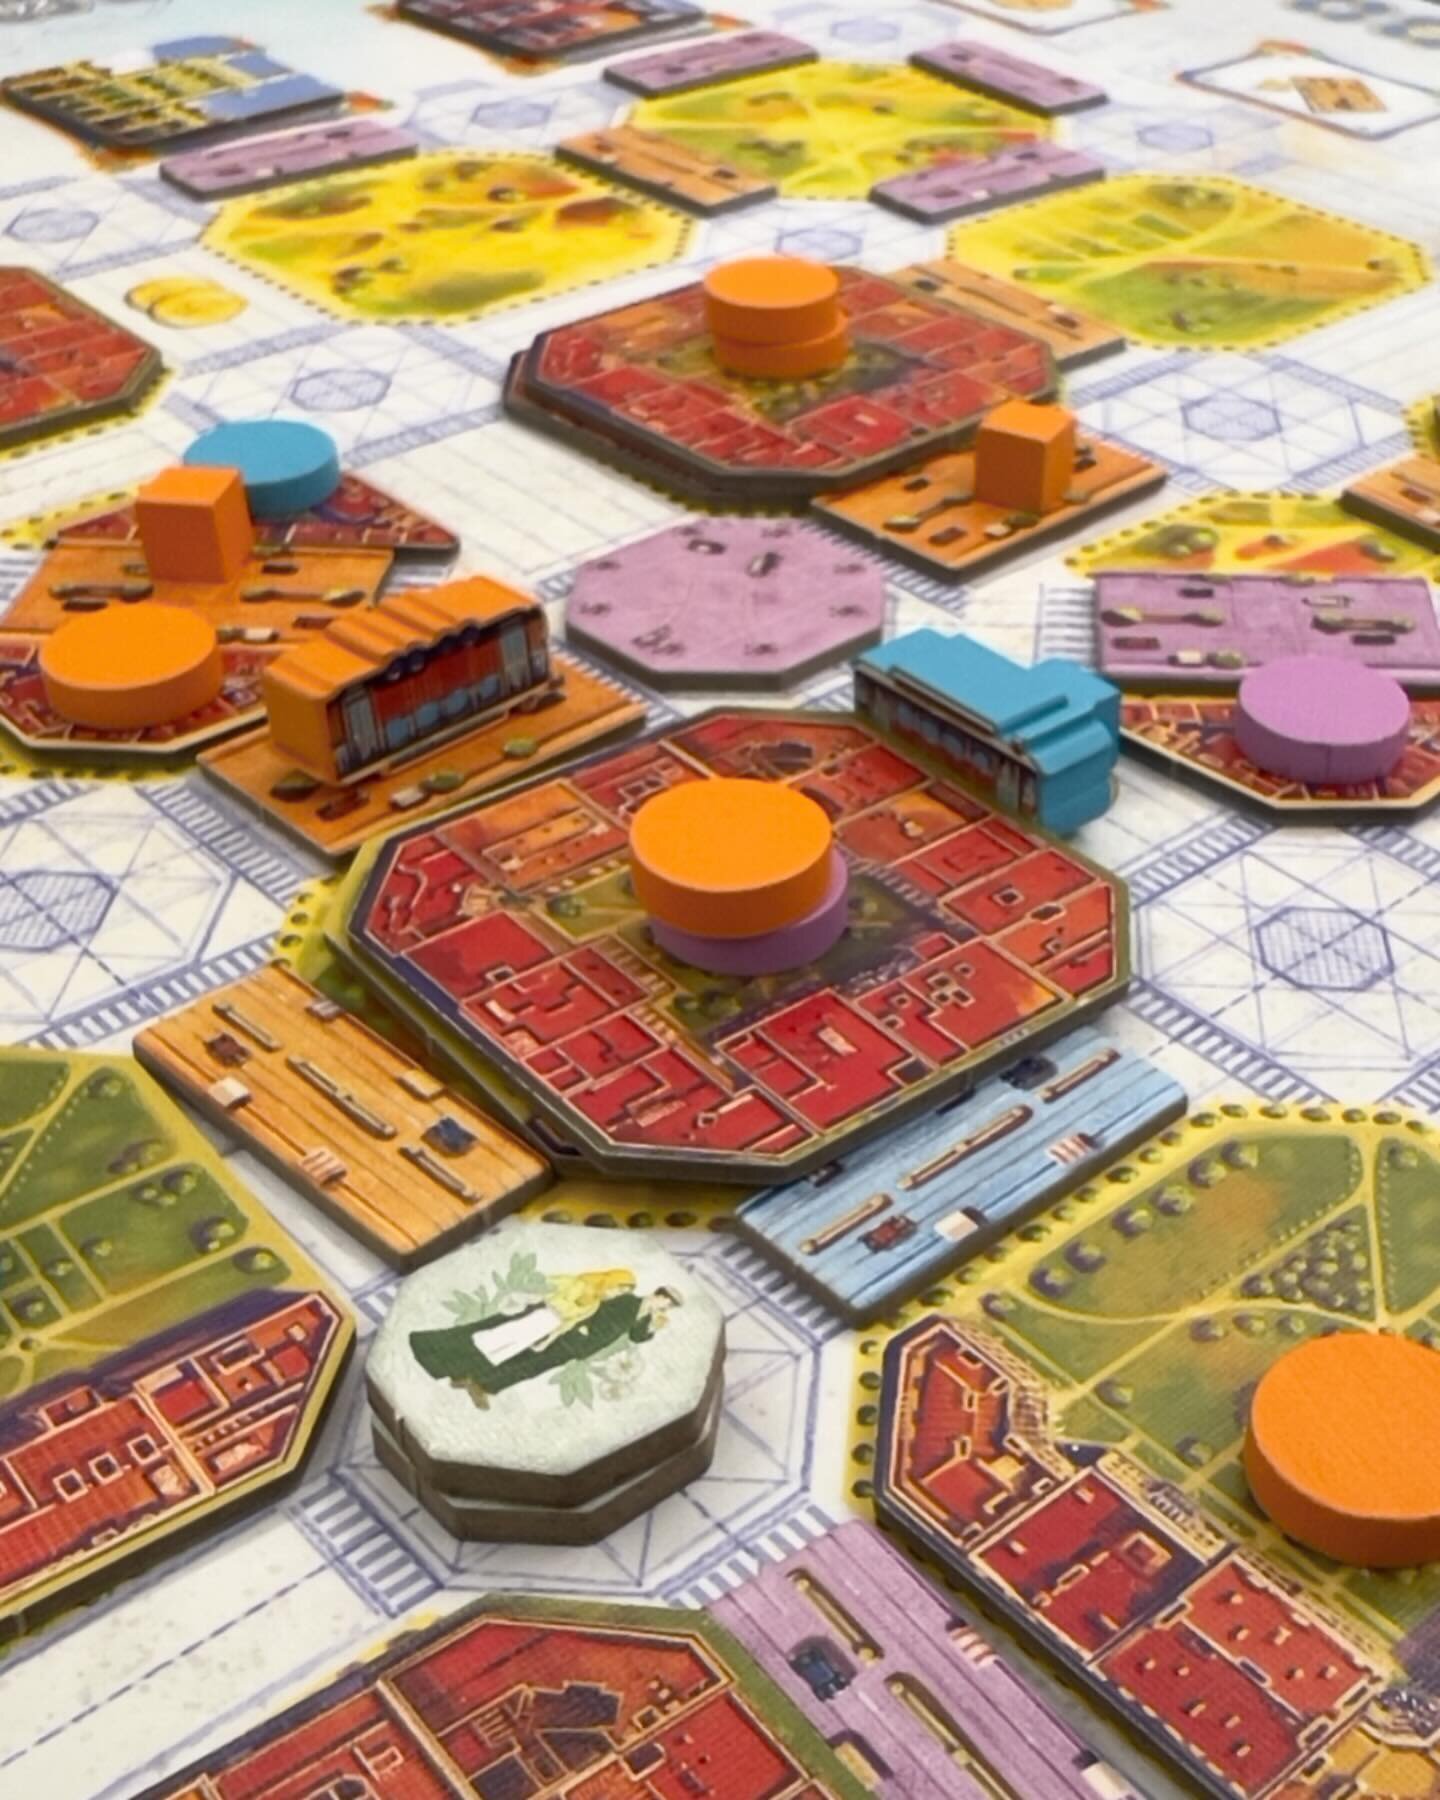 🇵🇹⬇️//🇬🇧 Last Monday, a day after LeiriaCon, we had the pleasure of scheduling a gaming session with our friend @marksgamegram, after a bit of sightseeing around Porto. 🔎
.
Barcelona by @boardanddice was the chosen game to put on the table, one 